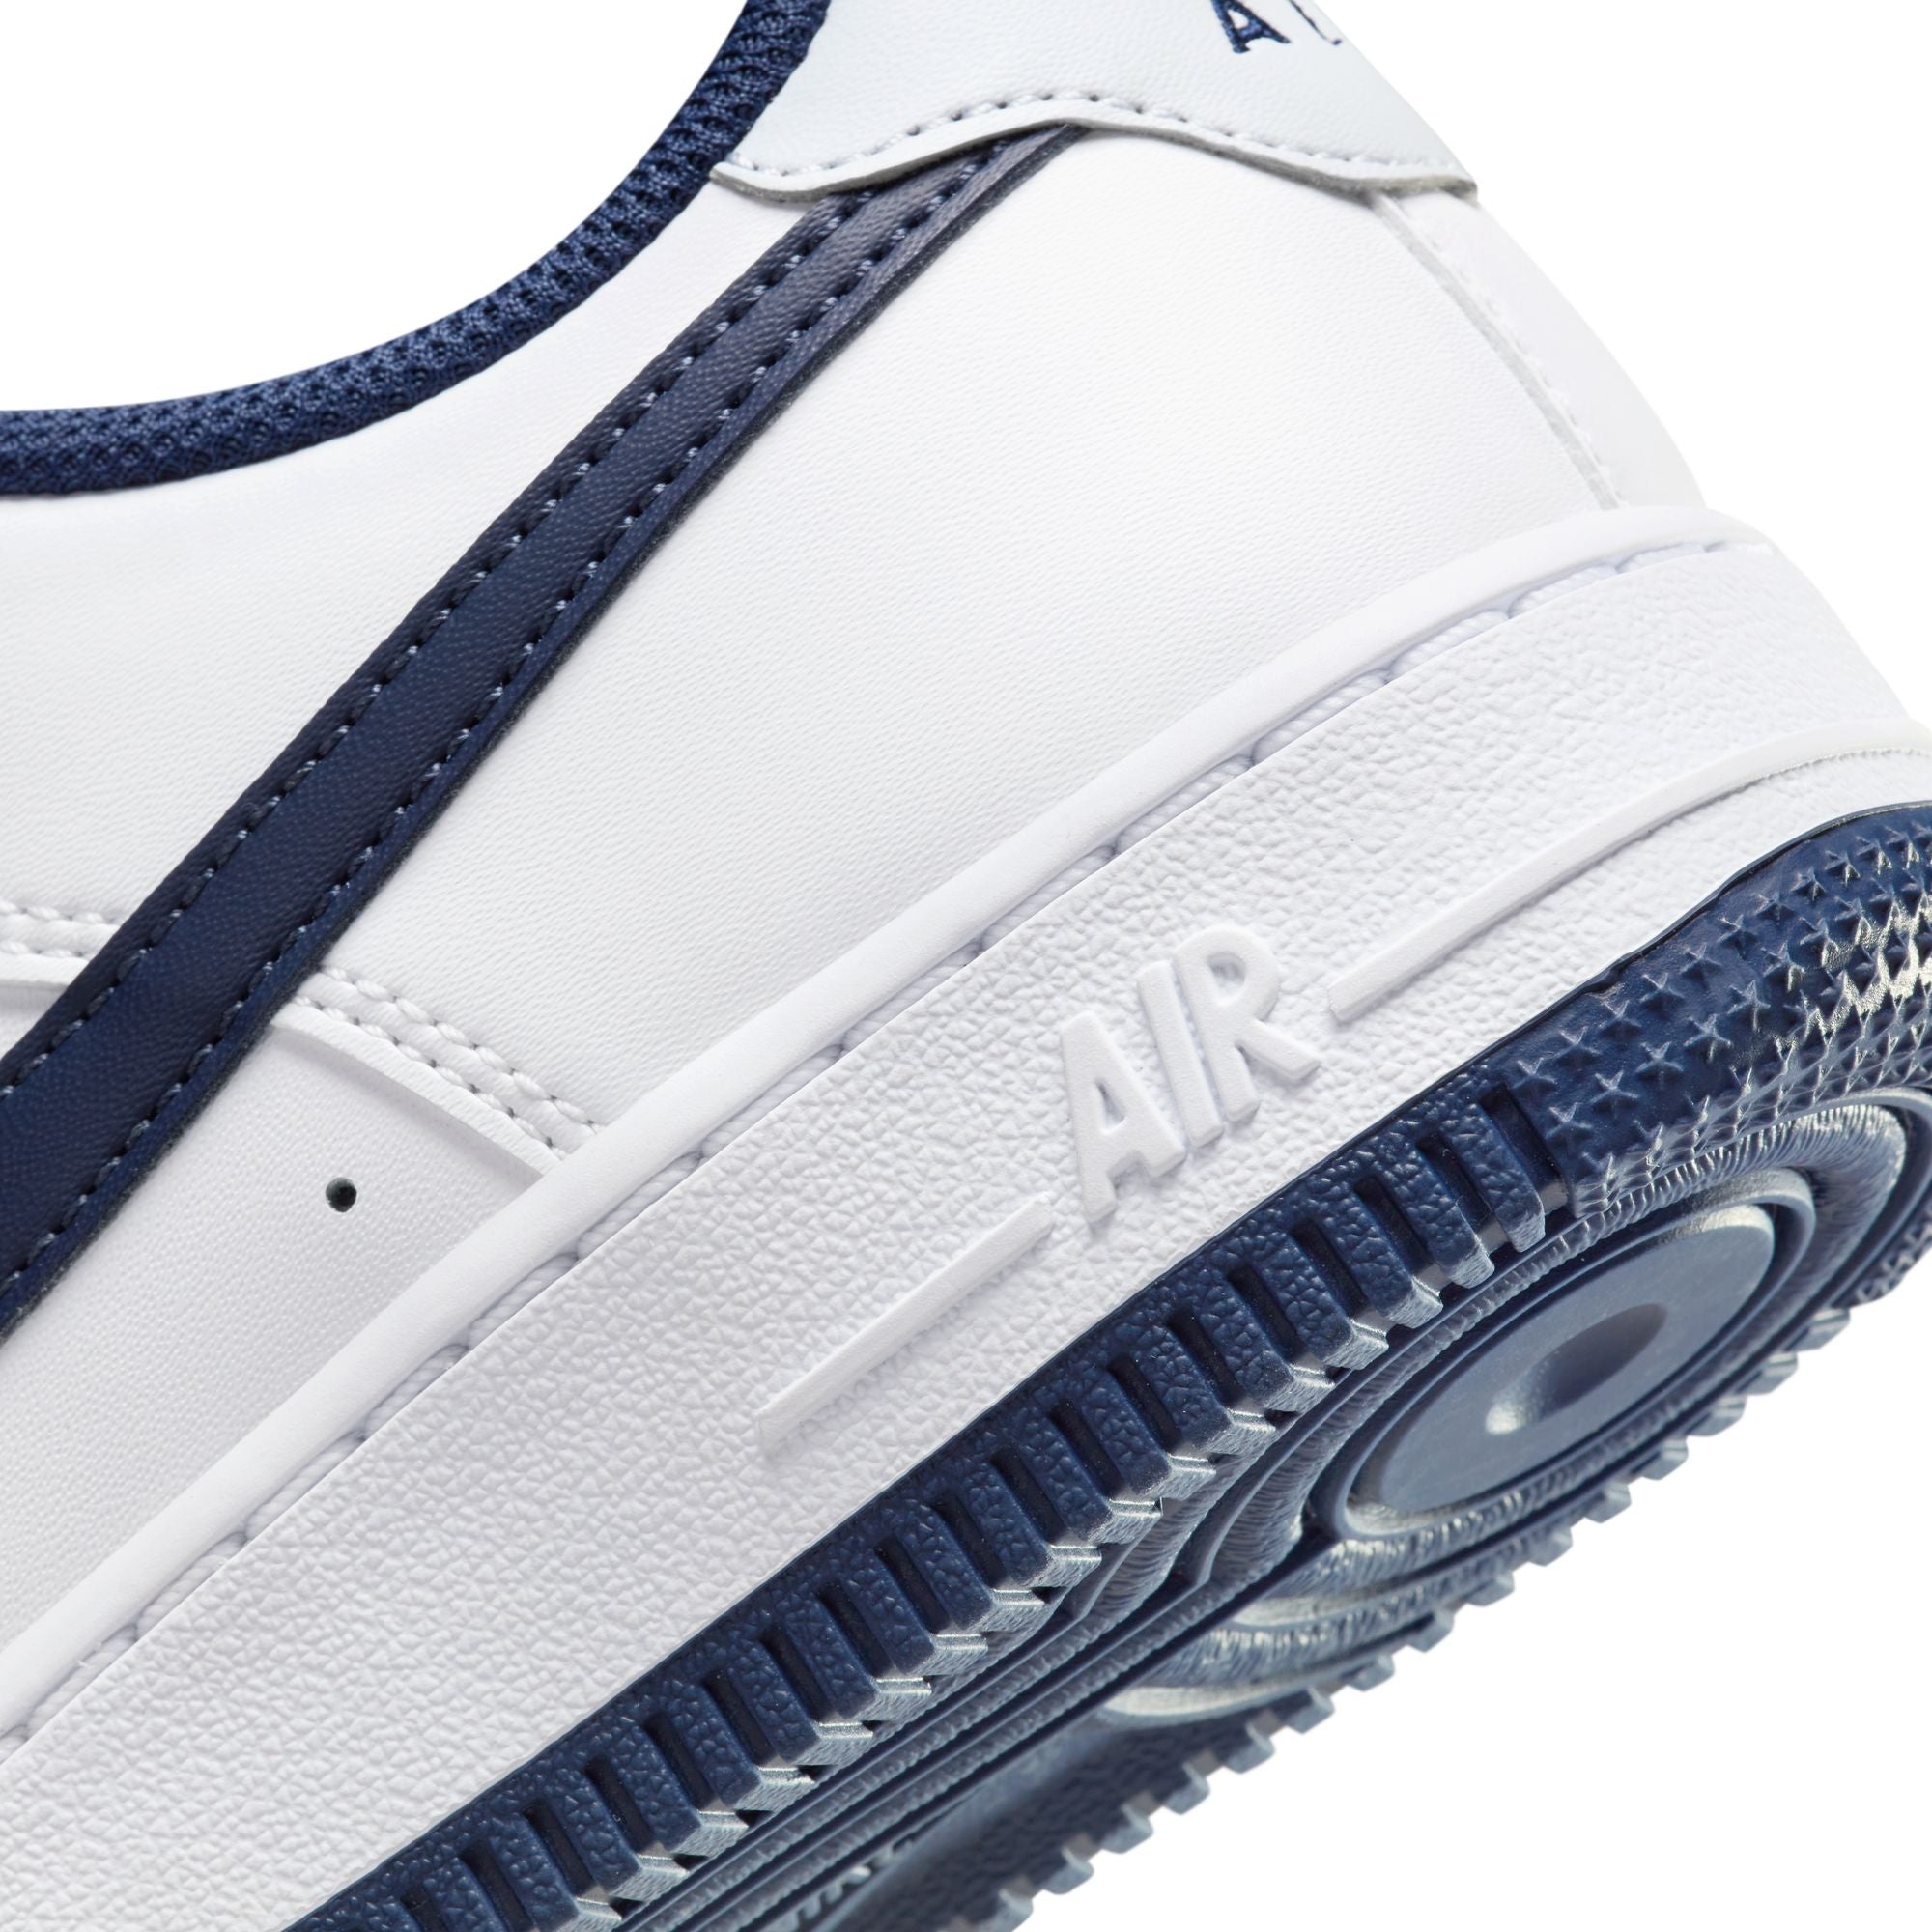 Youth Air Force 1 'White/Midnight Navy'